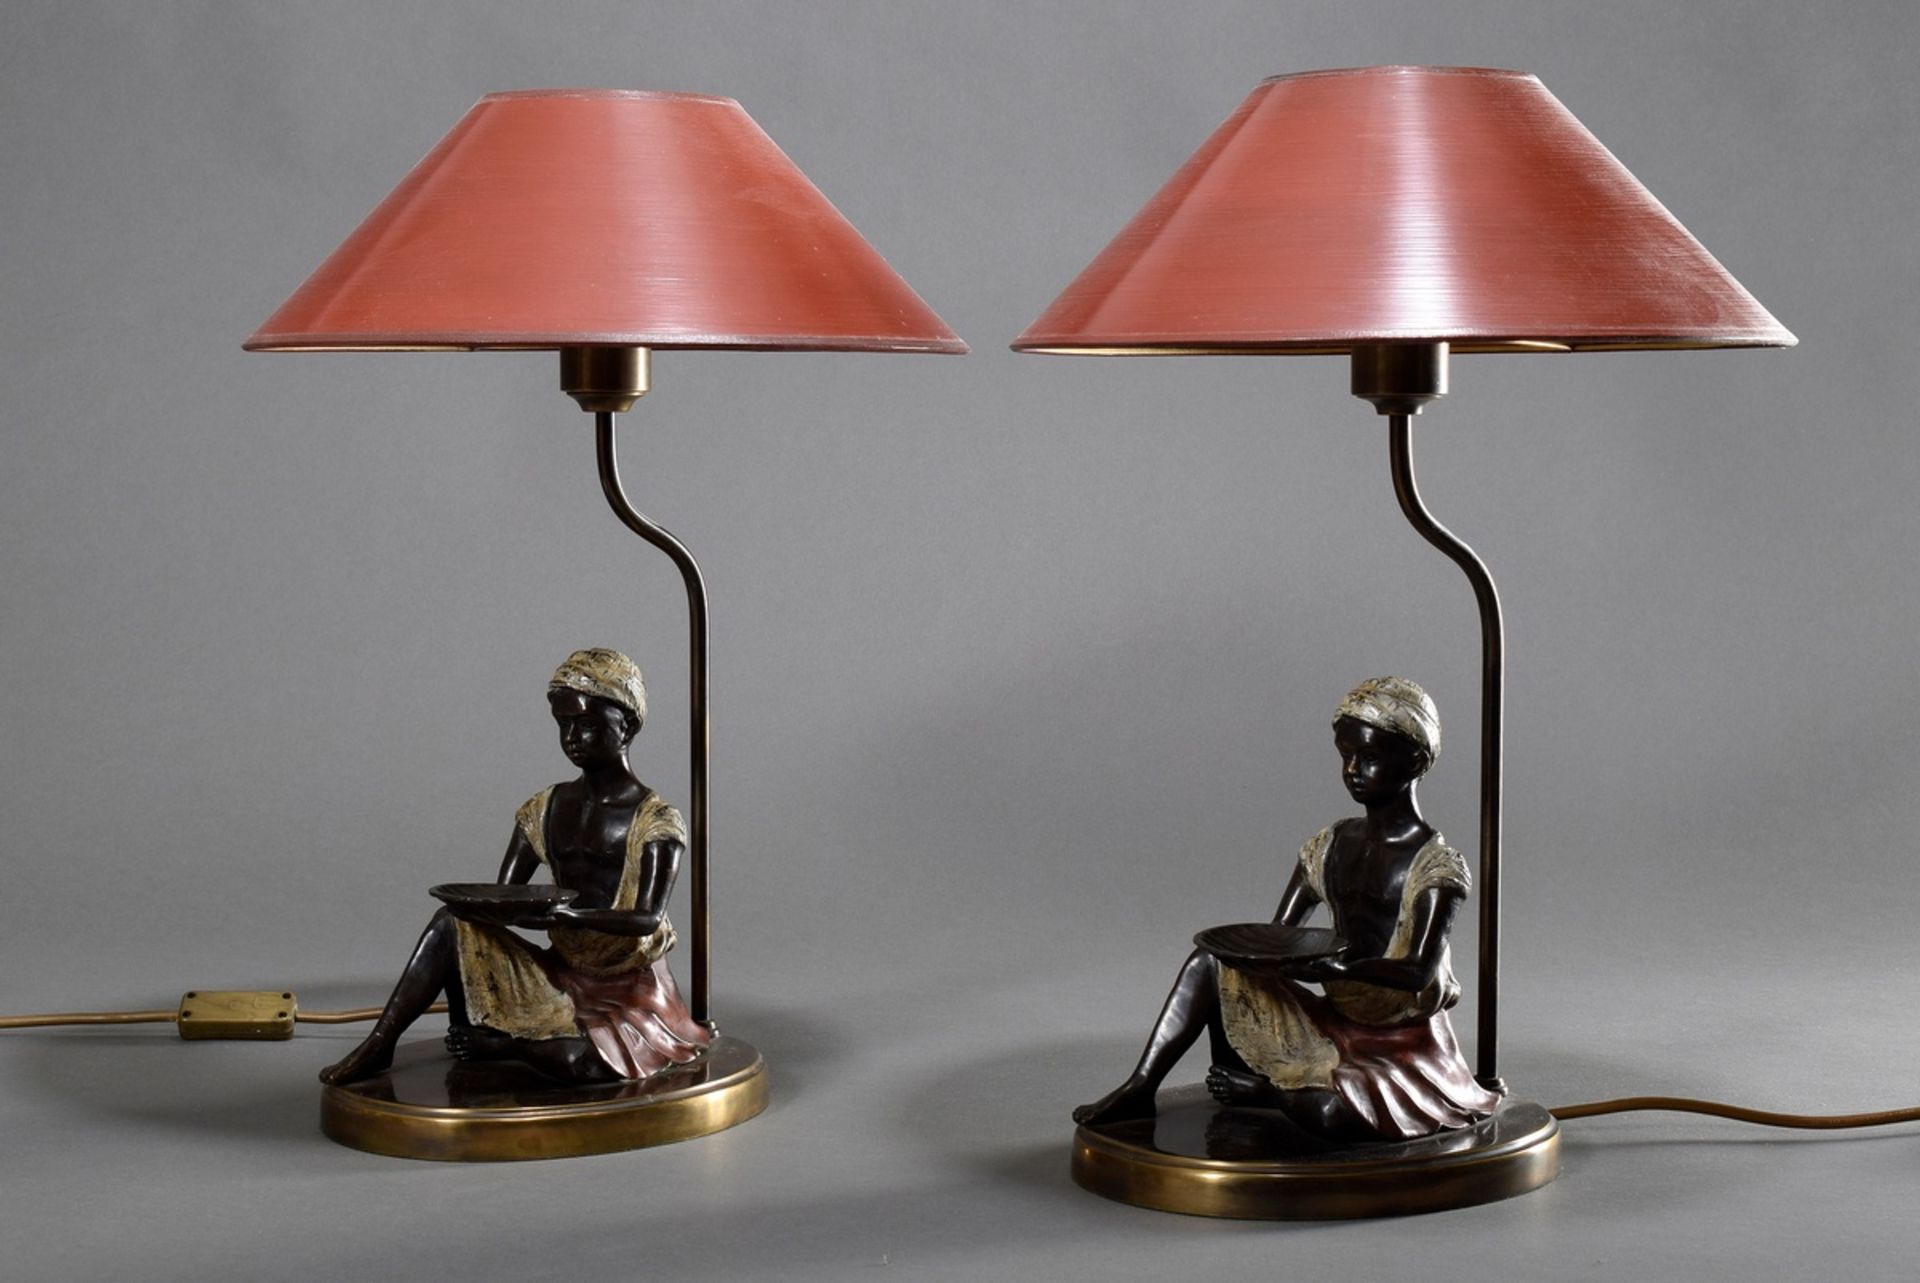 Pair of modern table lamps "Figures with shells", metal coloured, h. 47,5cm, slight scratches - Image 8 of 8